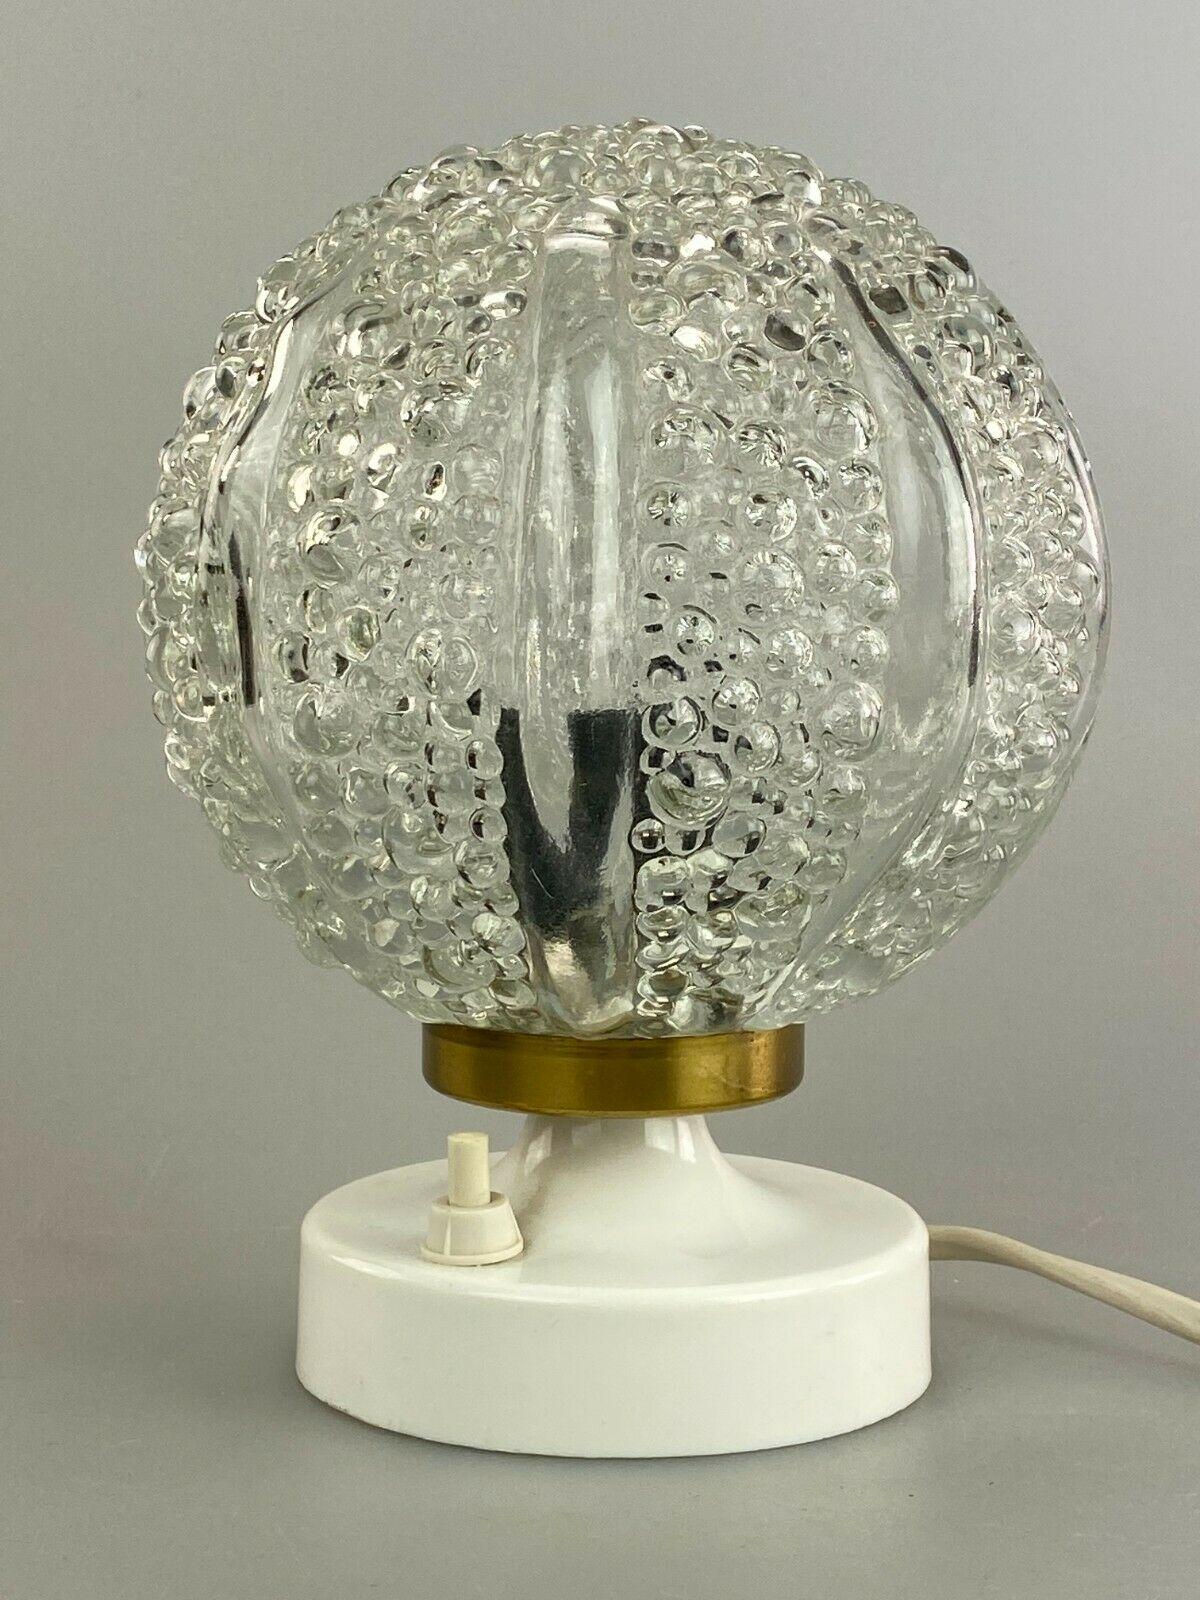 60s 70s Ball Lamp Light Table Lamp Bedside Lamp Space Age Design For Sale 1